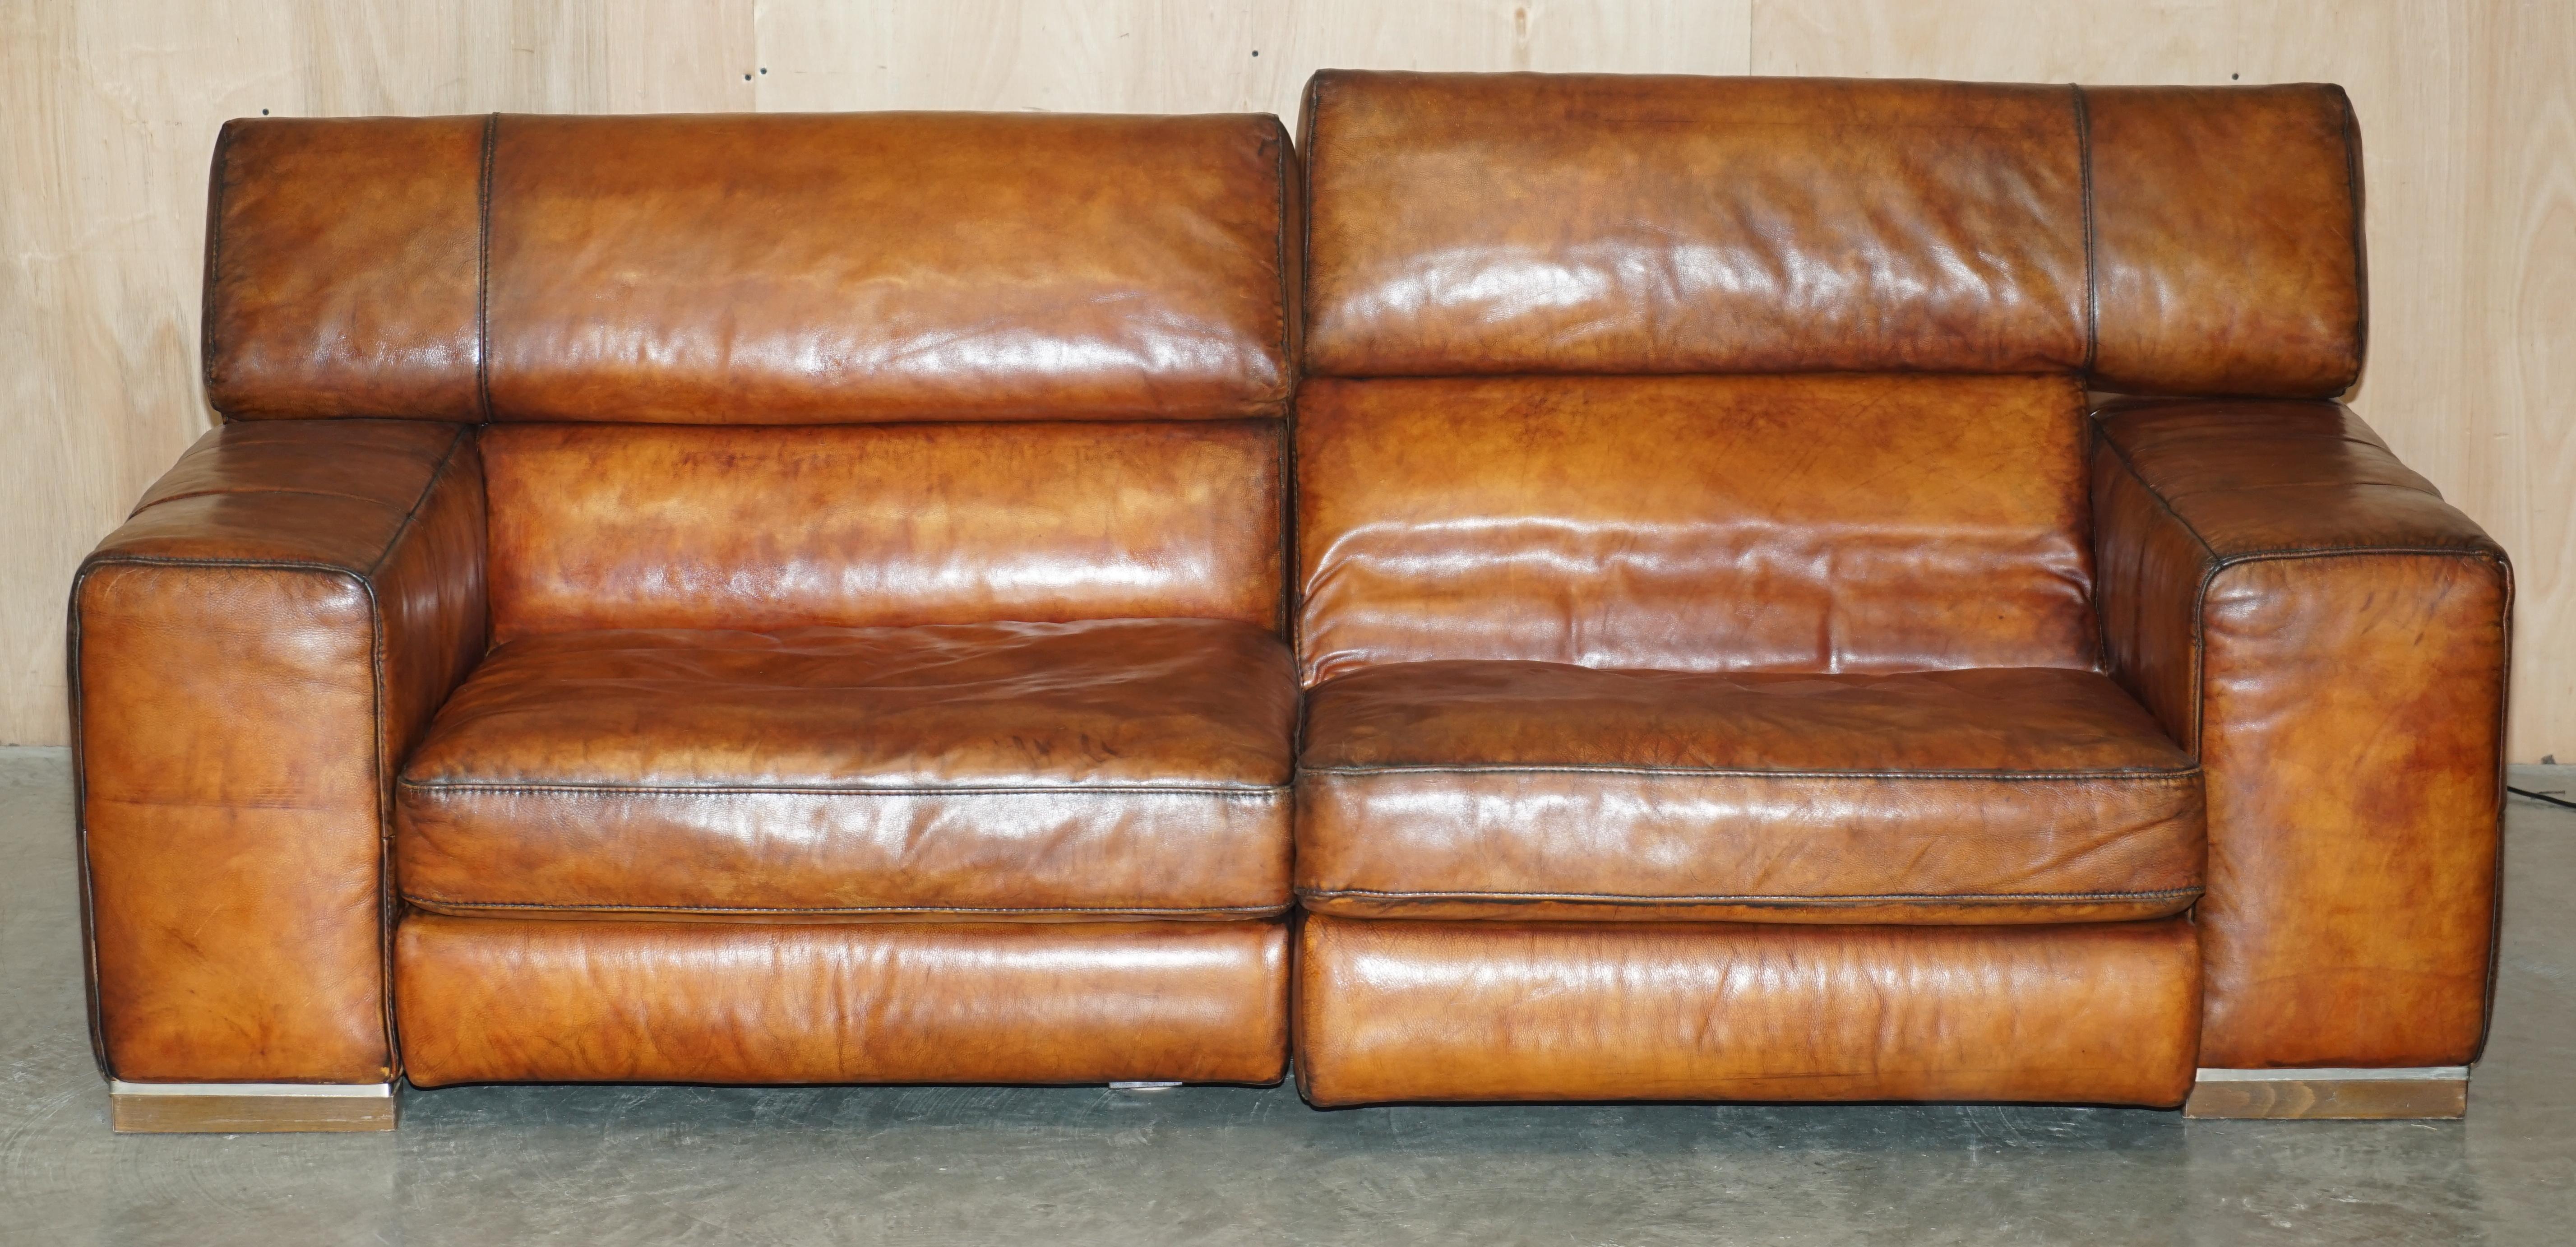 Natuzzi Roma Cigar Brown Leather Sofa Electric Raising Headrest Part of a Suite For Sale 8